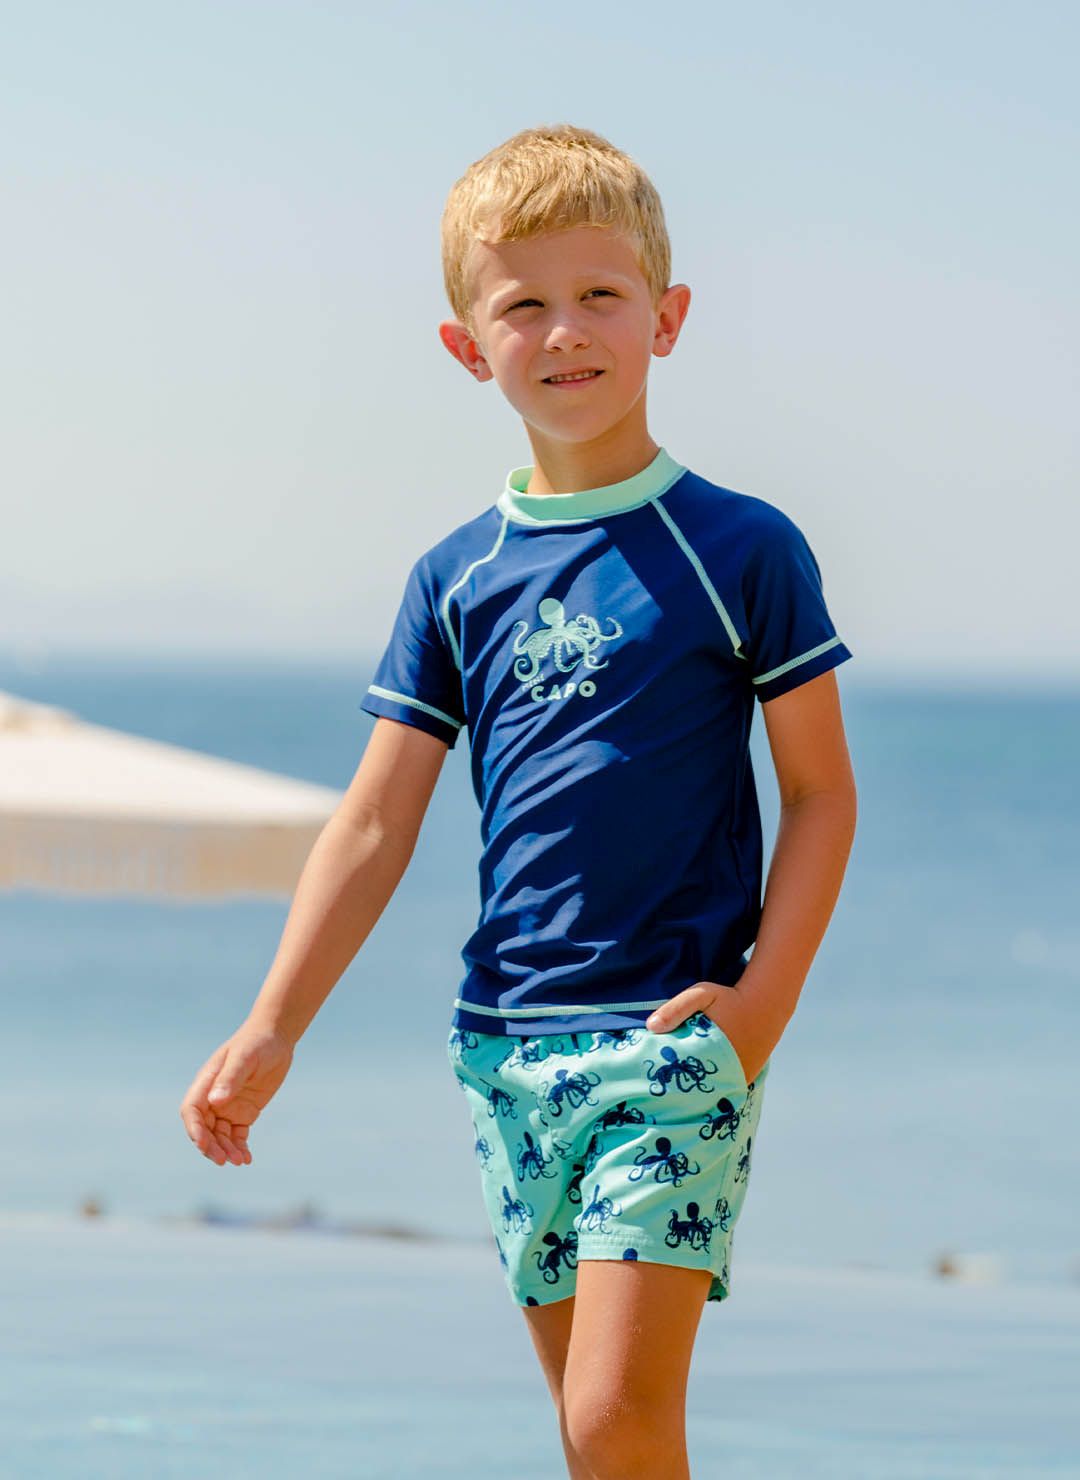 The Jack are essential CAHA CAPO boardshorts in Octopus Turquoise. Part of the CAHA CAPO boy's swimwear collection.